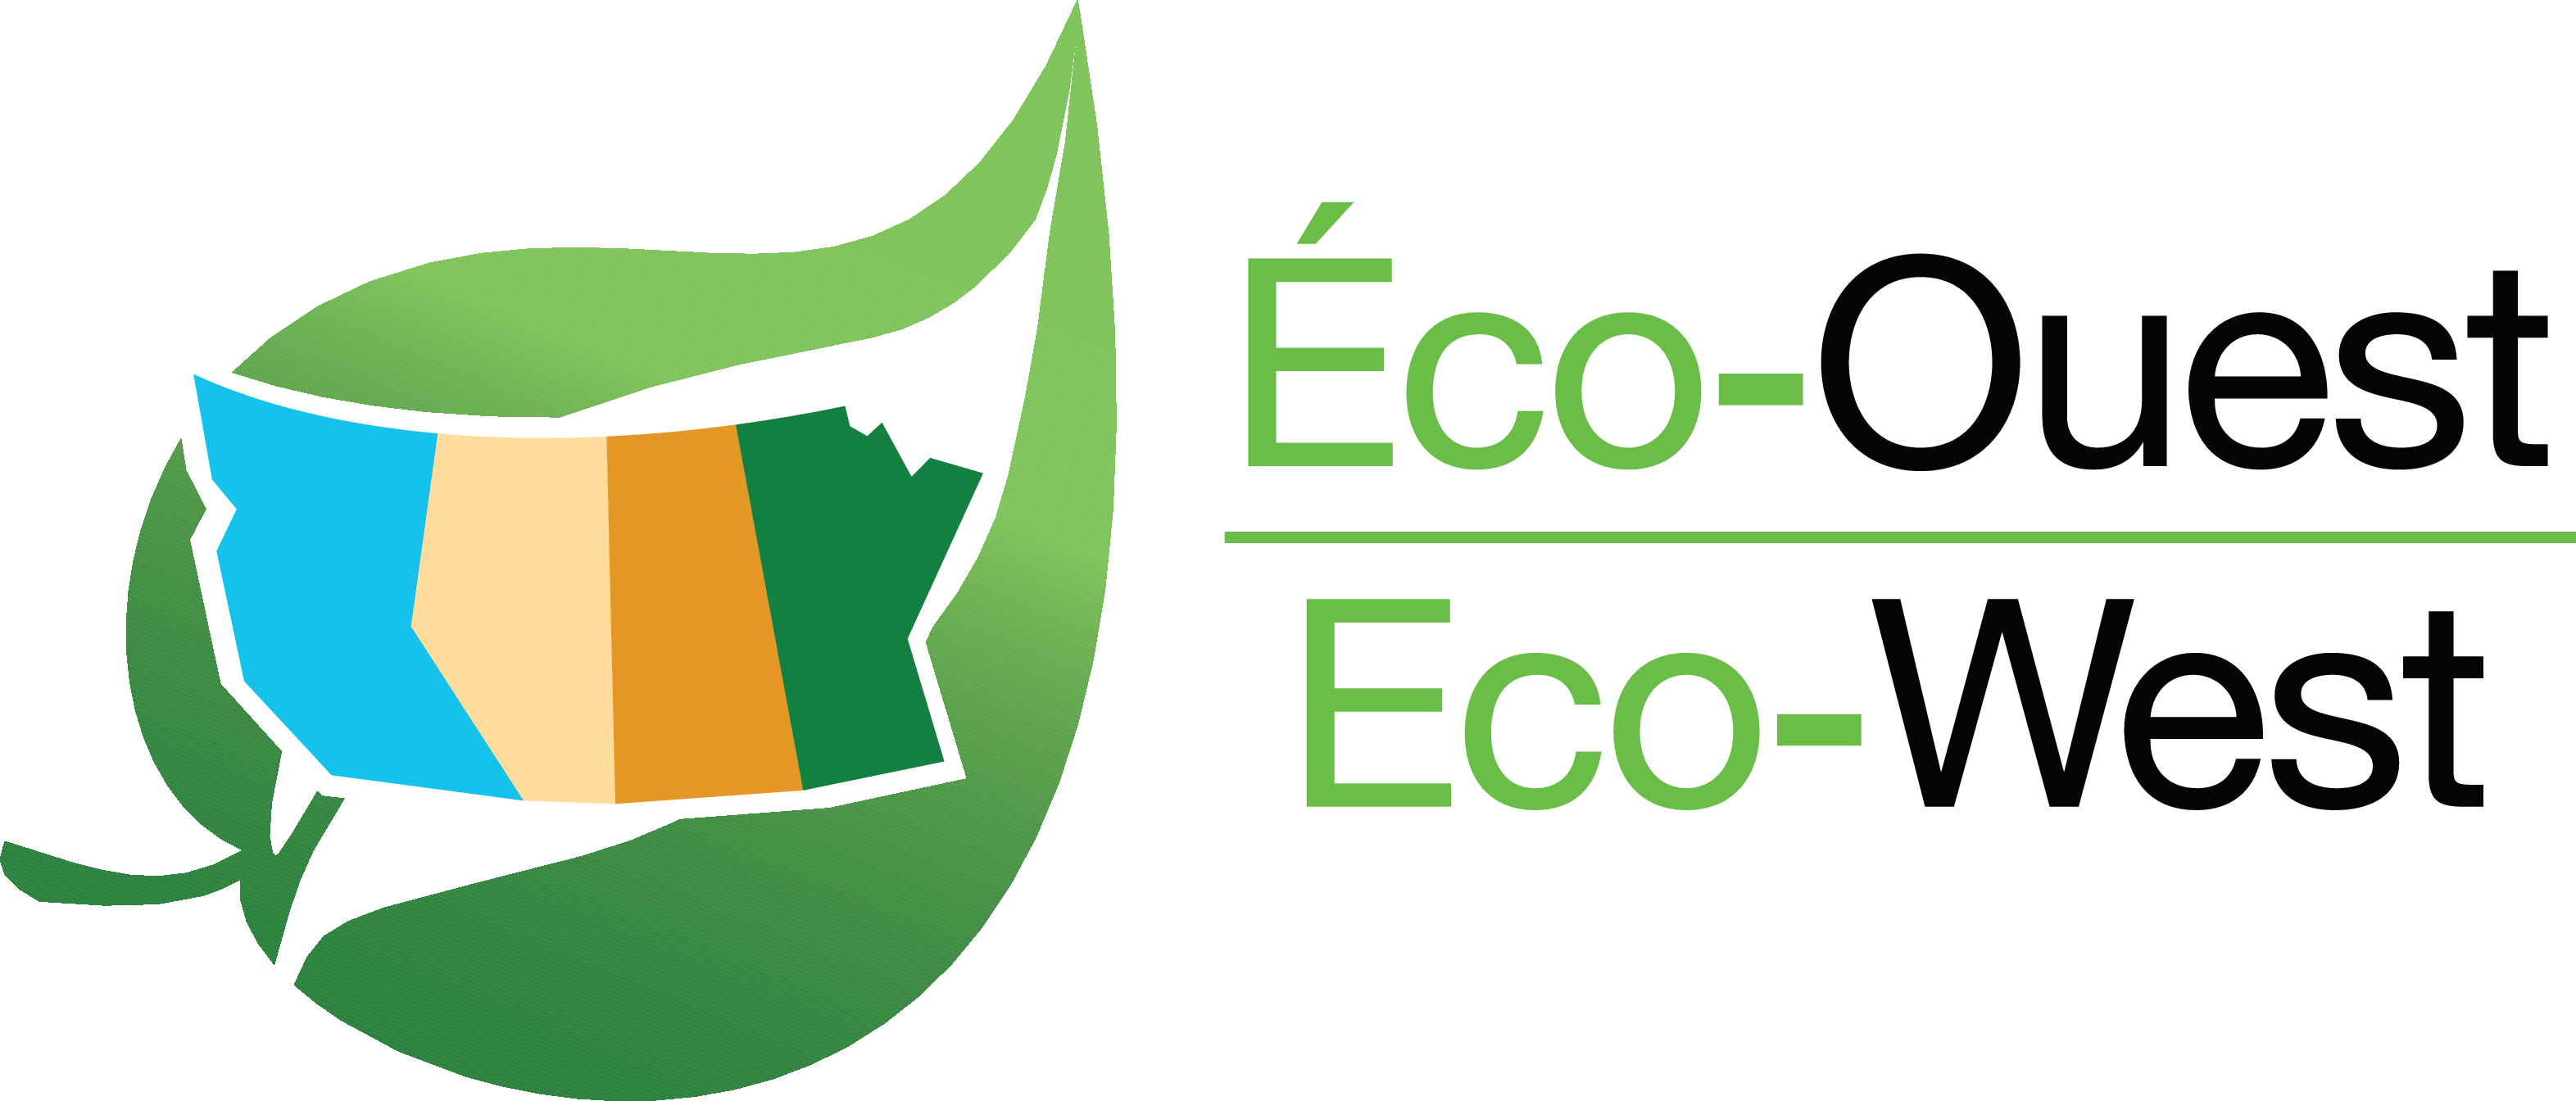 eco-ouest_logo